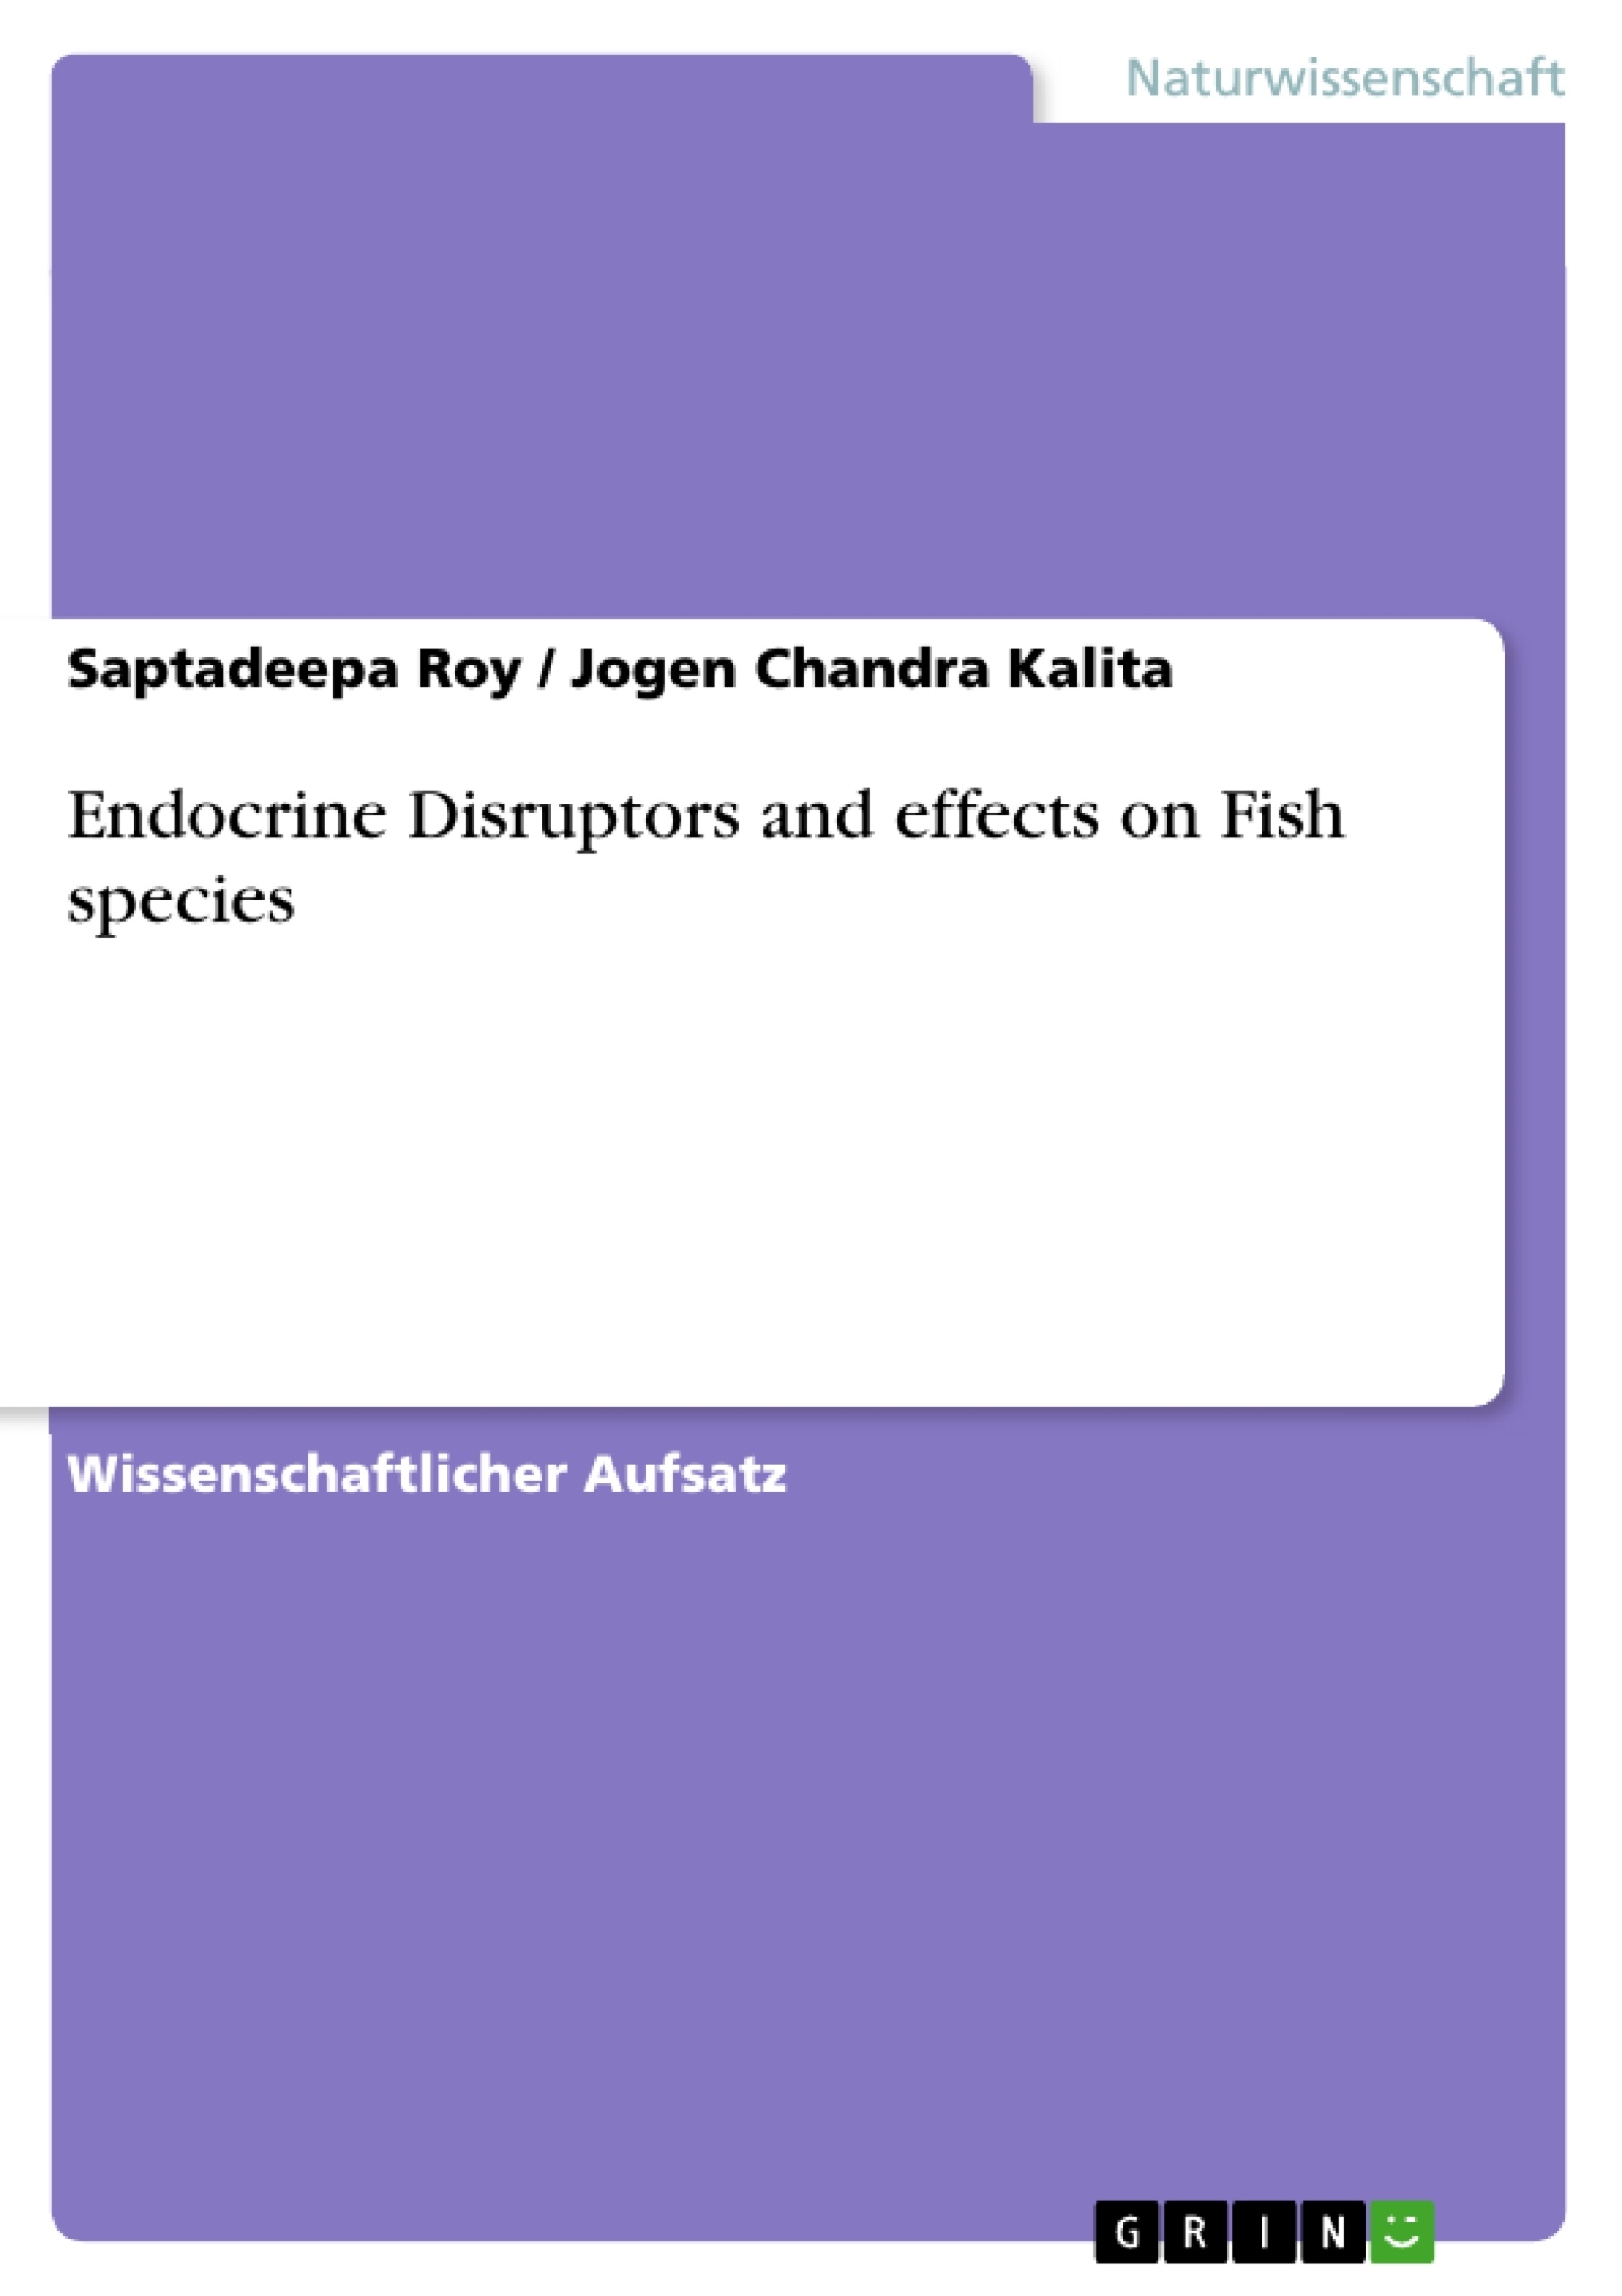 Título: Endocrine Disruptors and effects on Fish species